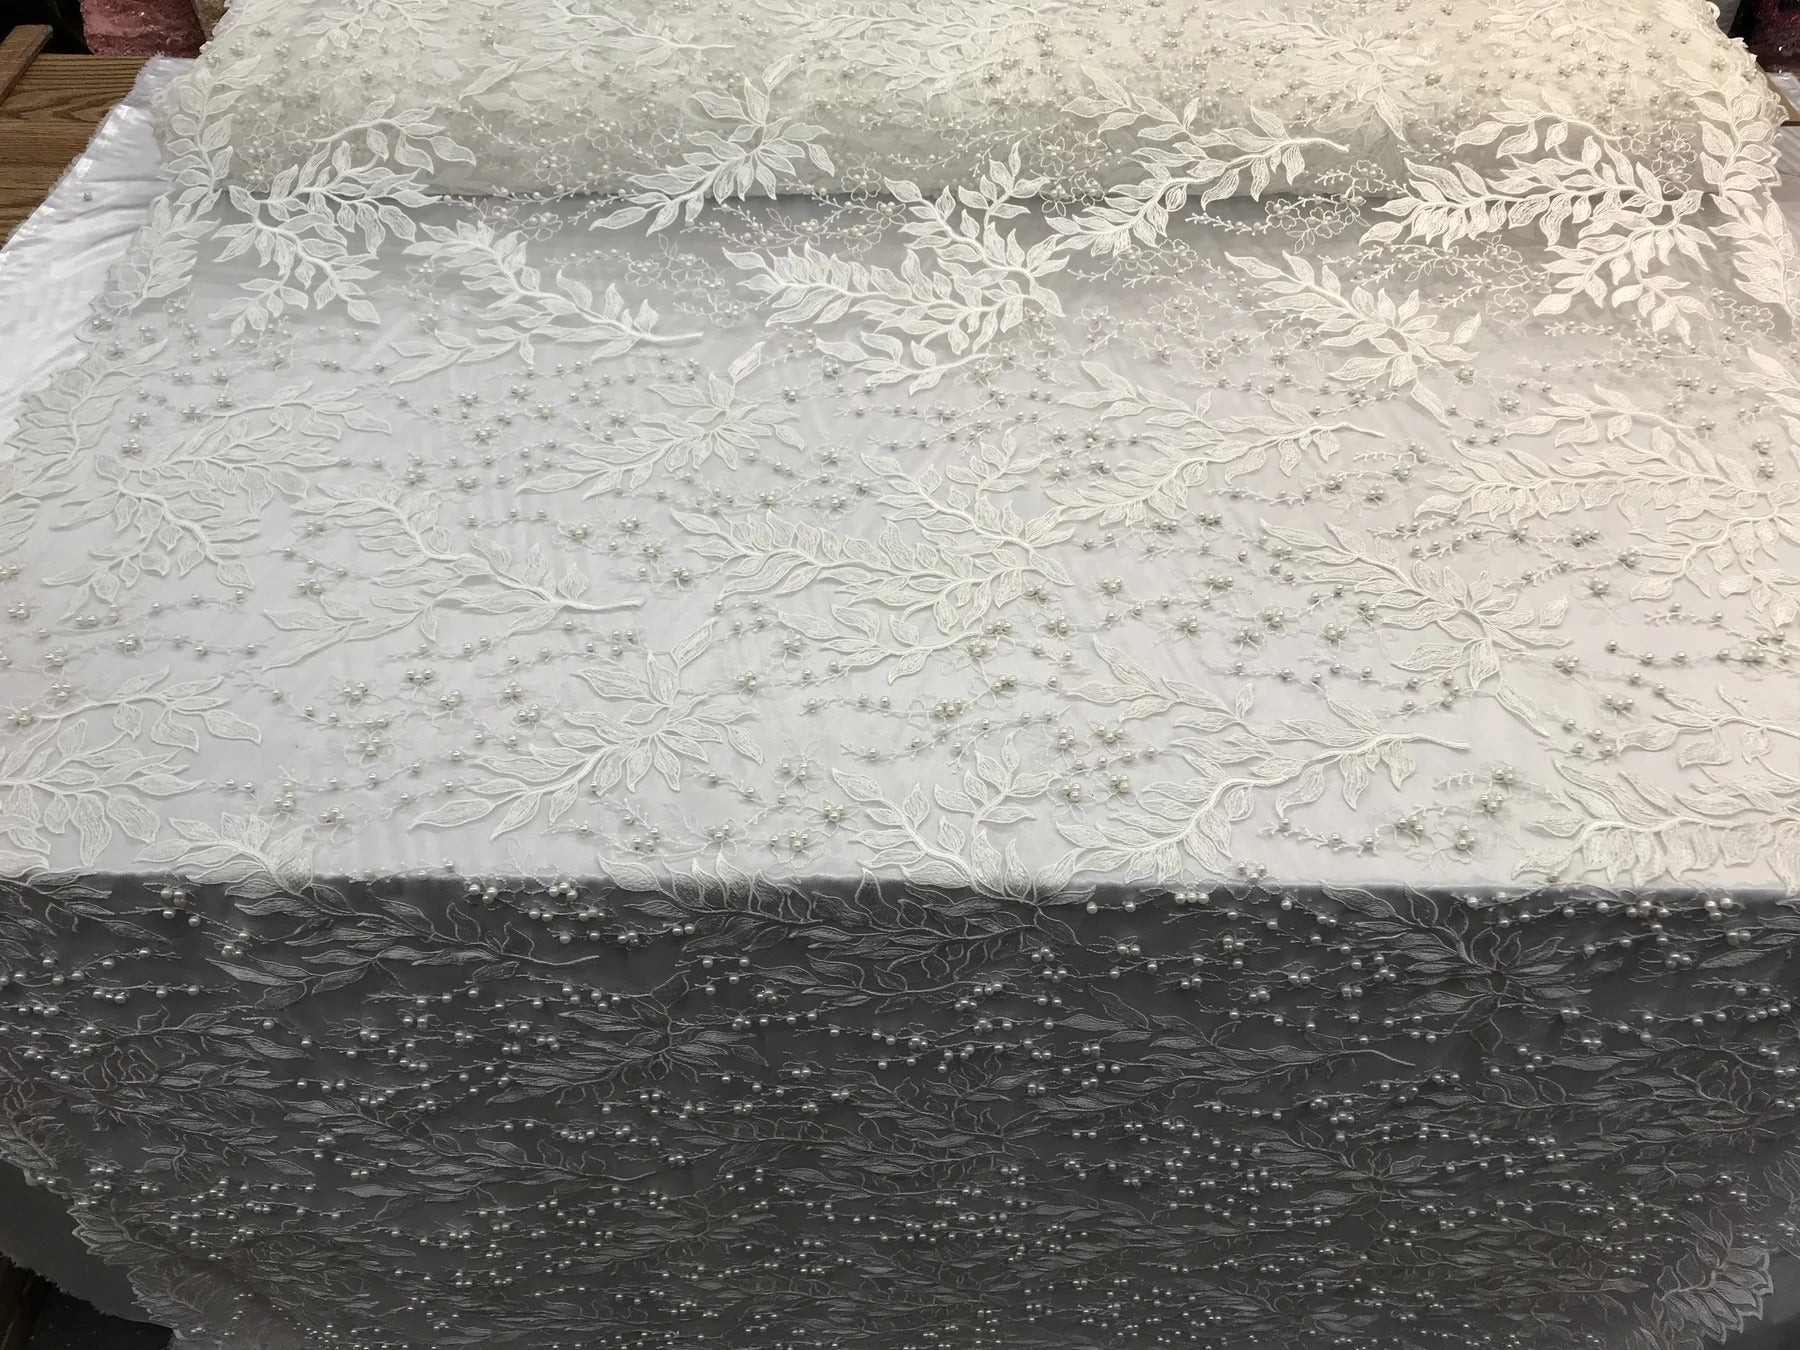 Floral Lace Fabric By the Yard_ Embroidered Beaded FabricICE FABRICSICE FABRICSIvoryFloral Lace Fabric By the Yard_ Embroidered Beaded Fabric ICE FABRICS Ivory